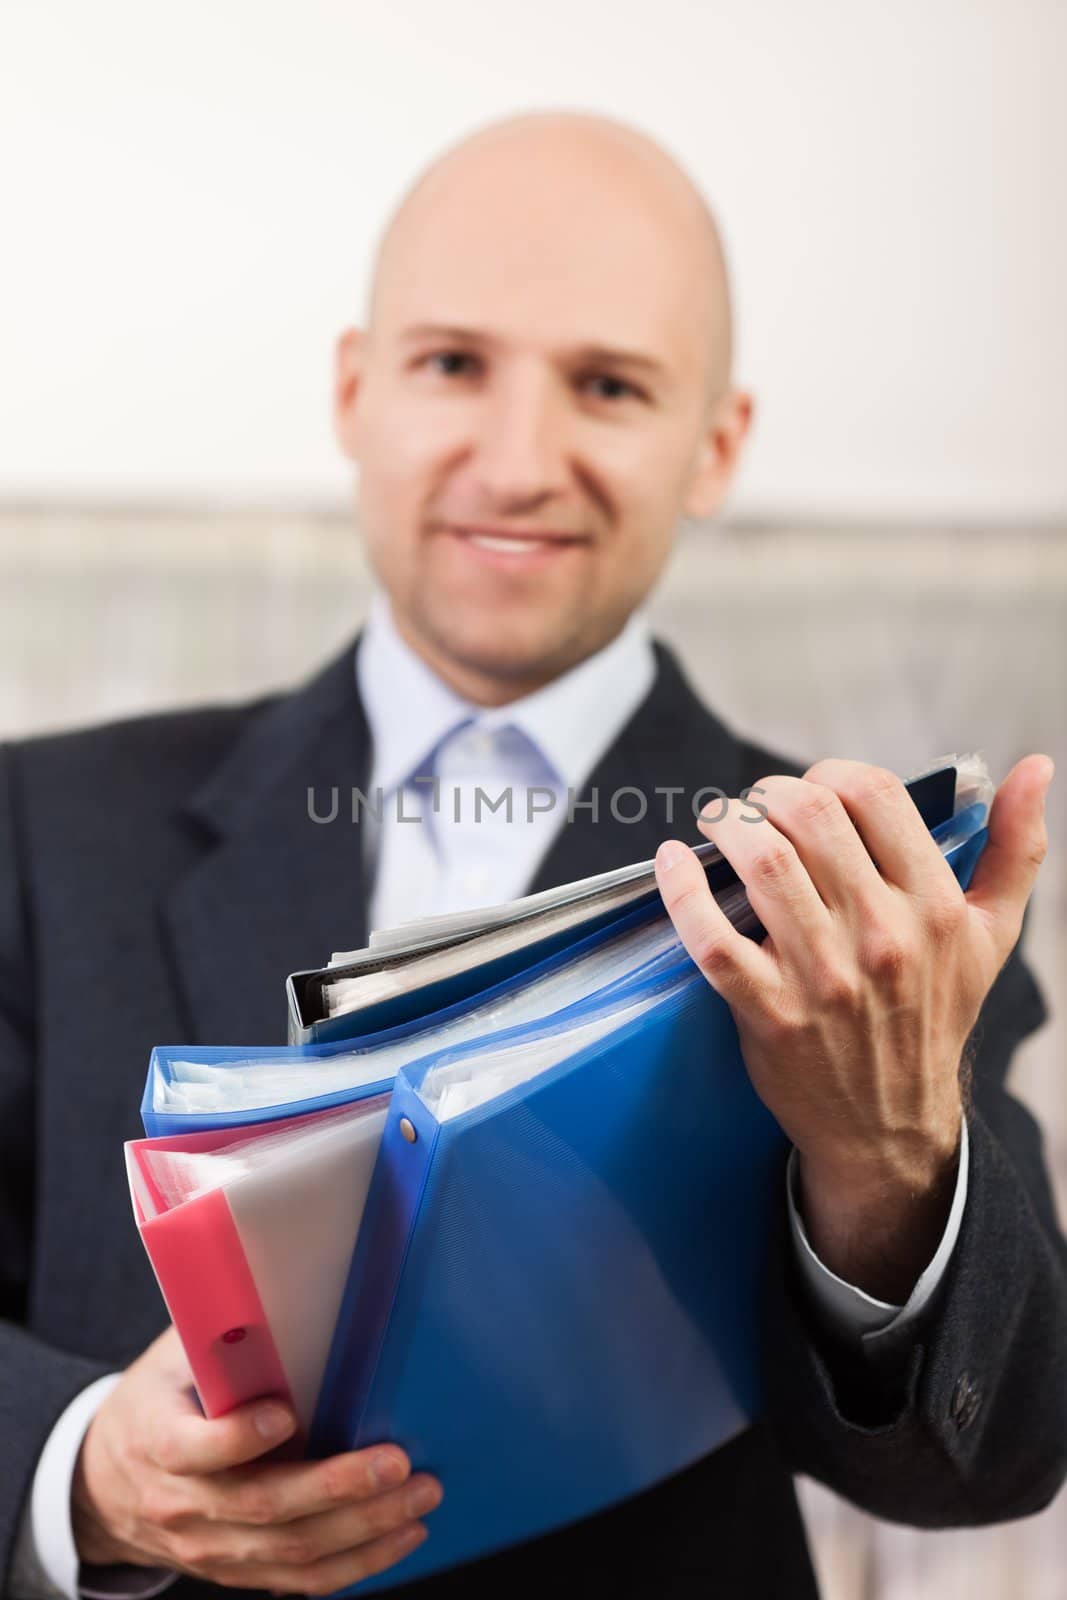 Paperwork - human hand holding business paper file